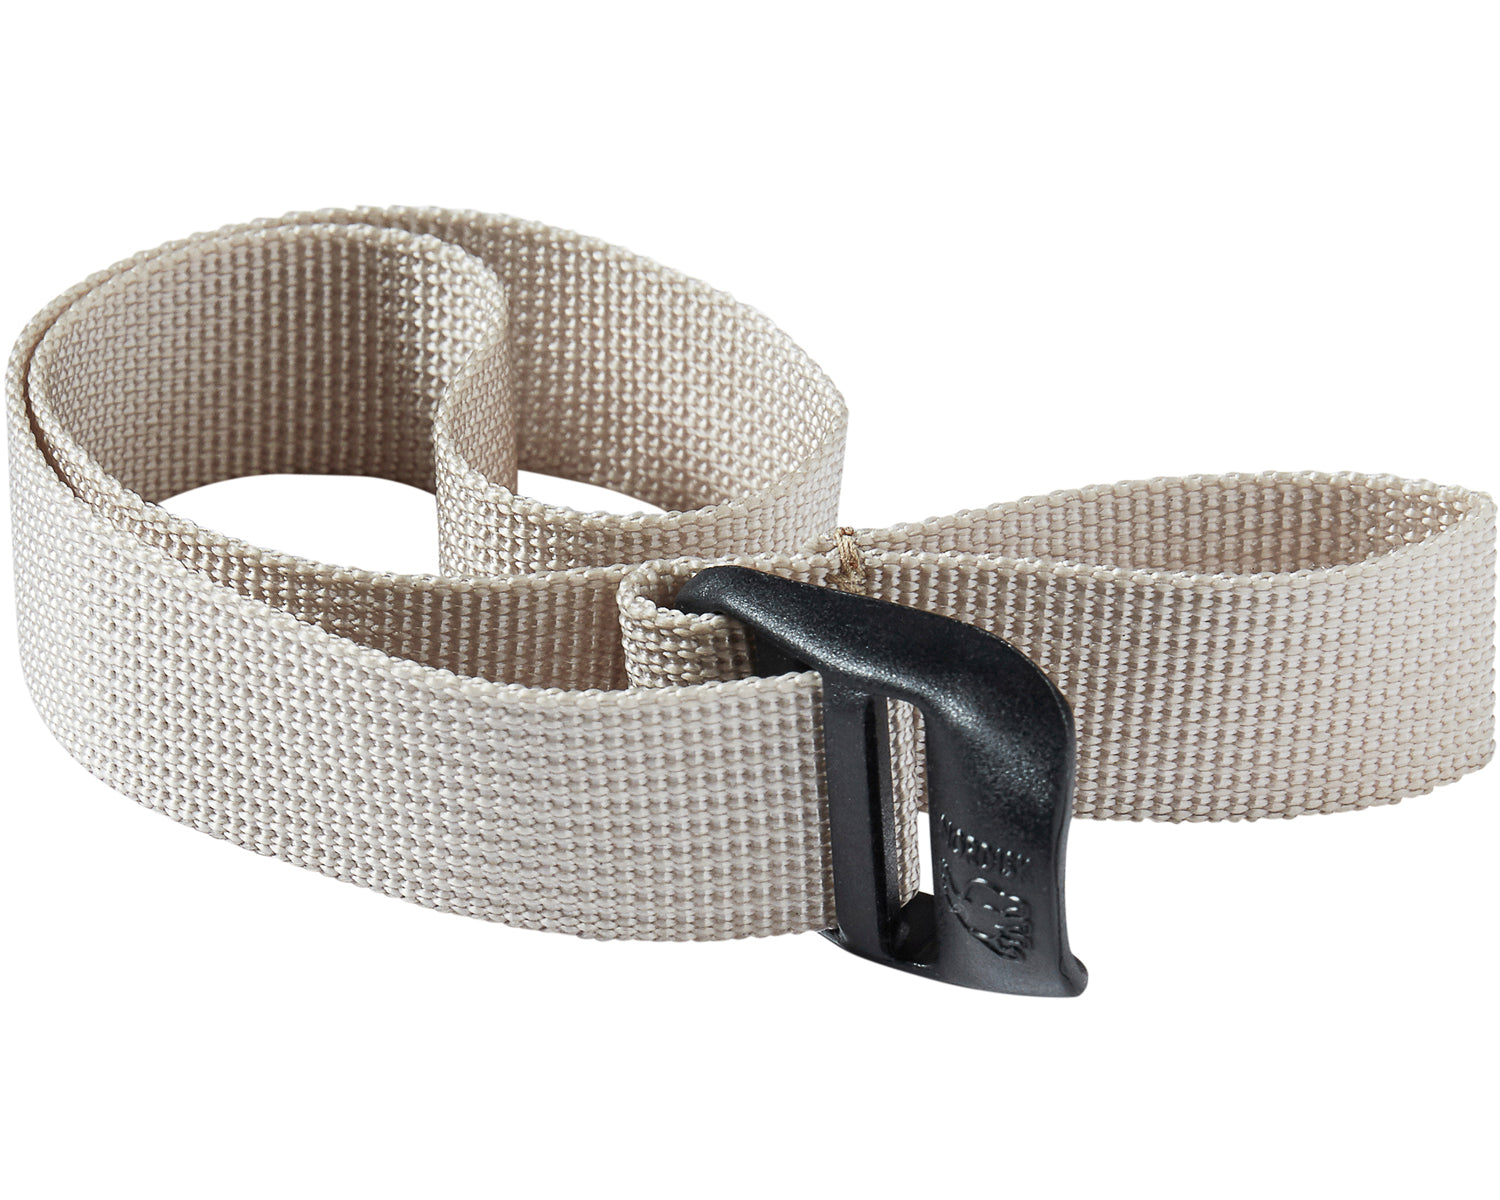 Legacy Nylon Webbing With High Quality Tension Lock - Beige